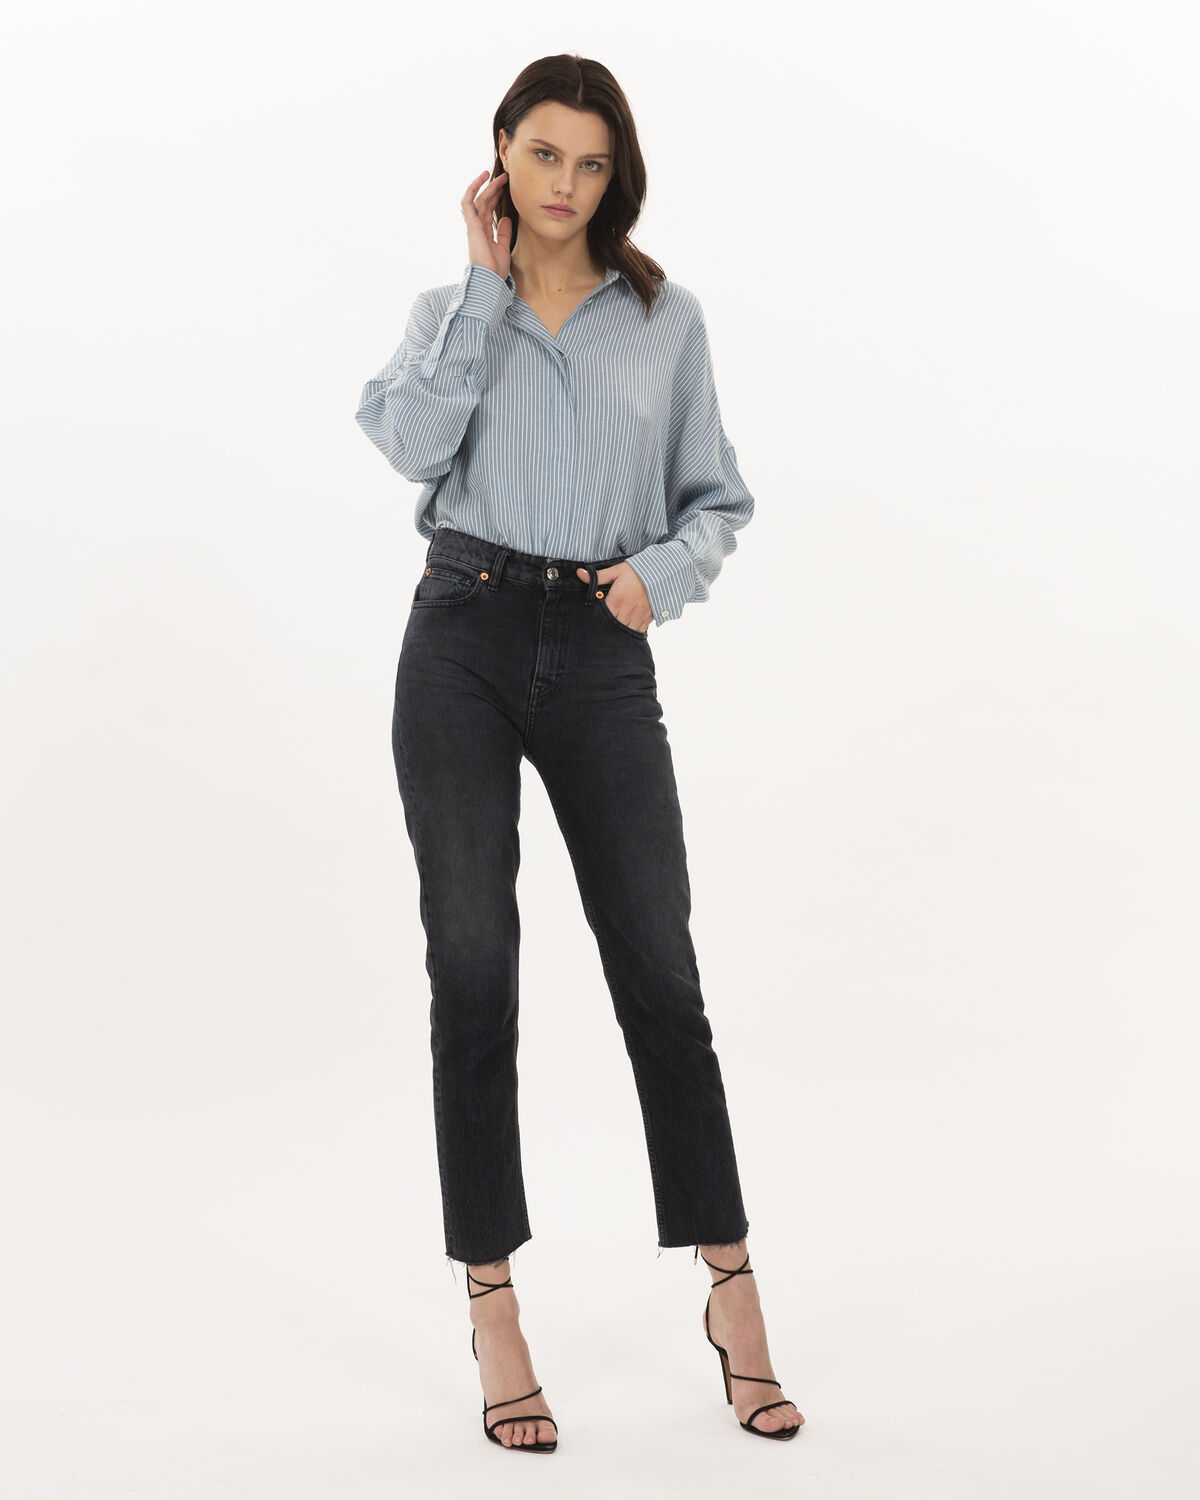 Photo of IRO Paris Markina Shirt Light Blue - This Blue Striped Shirt Is Distinctive For Its Oversized Design. Fitted Into Trousers, It Can Be Worn For All Types Of Occasions. Shirts-Tops